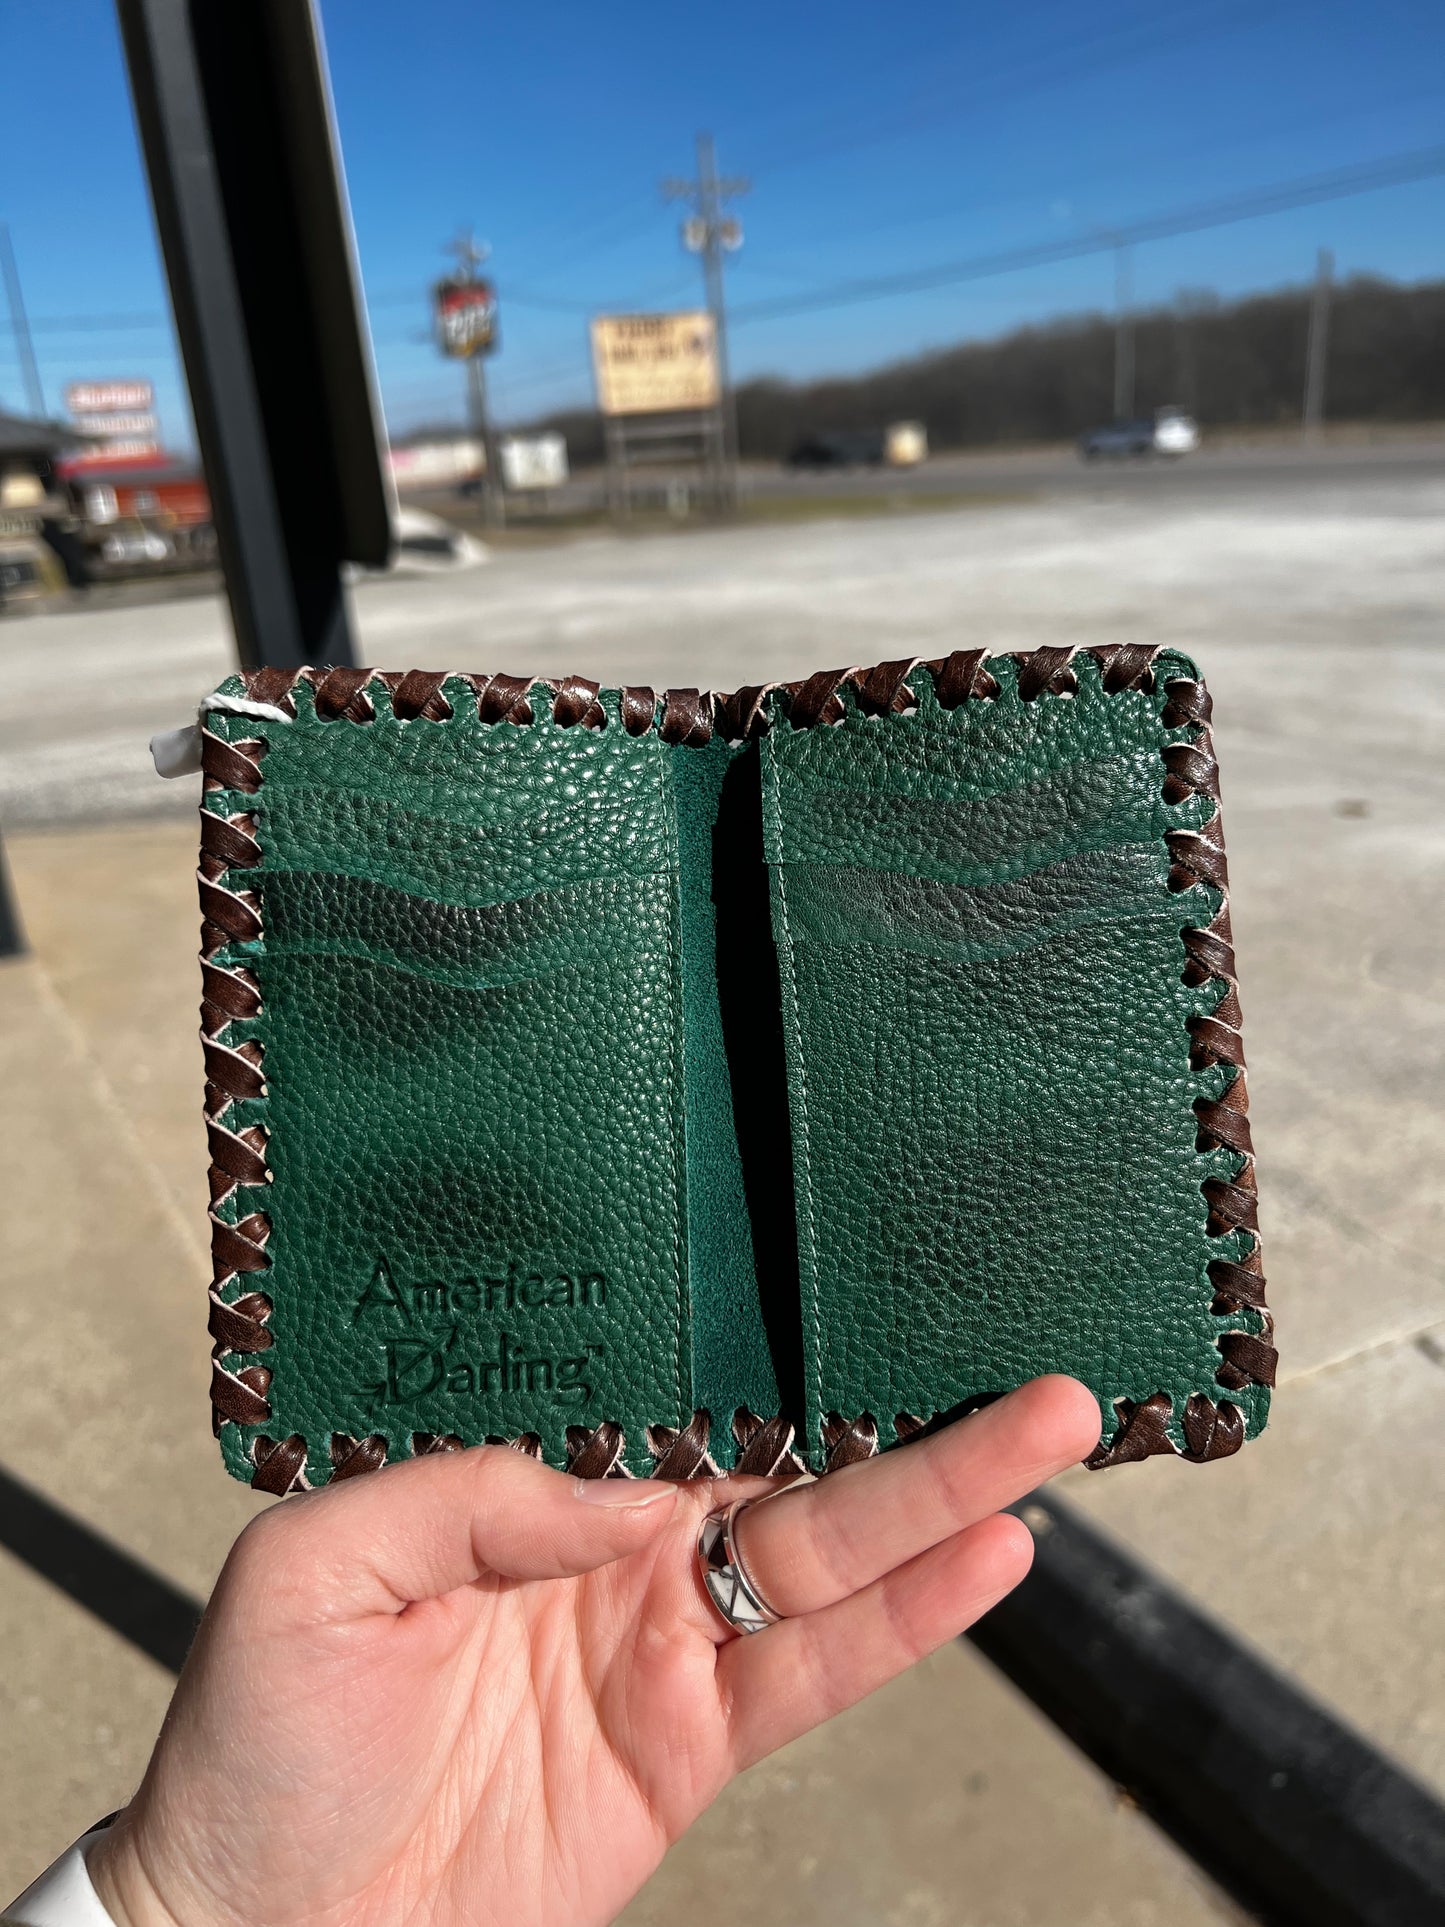 Leather Small Wallet